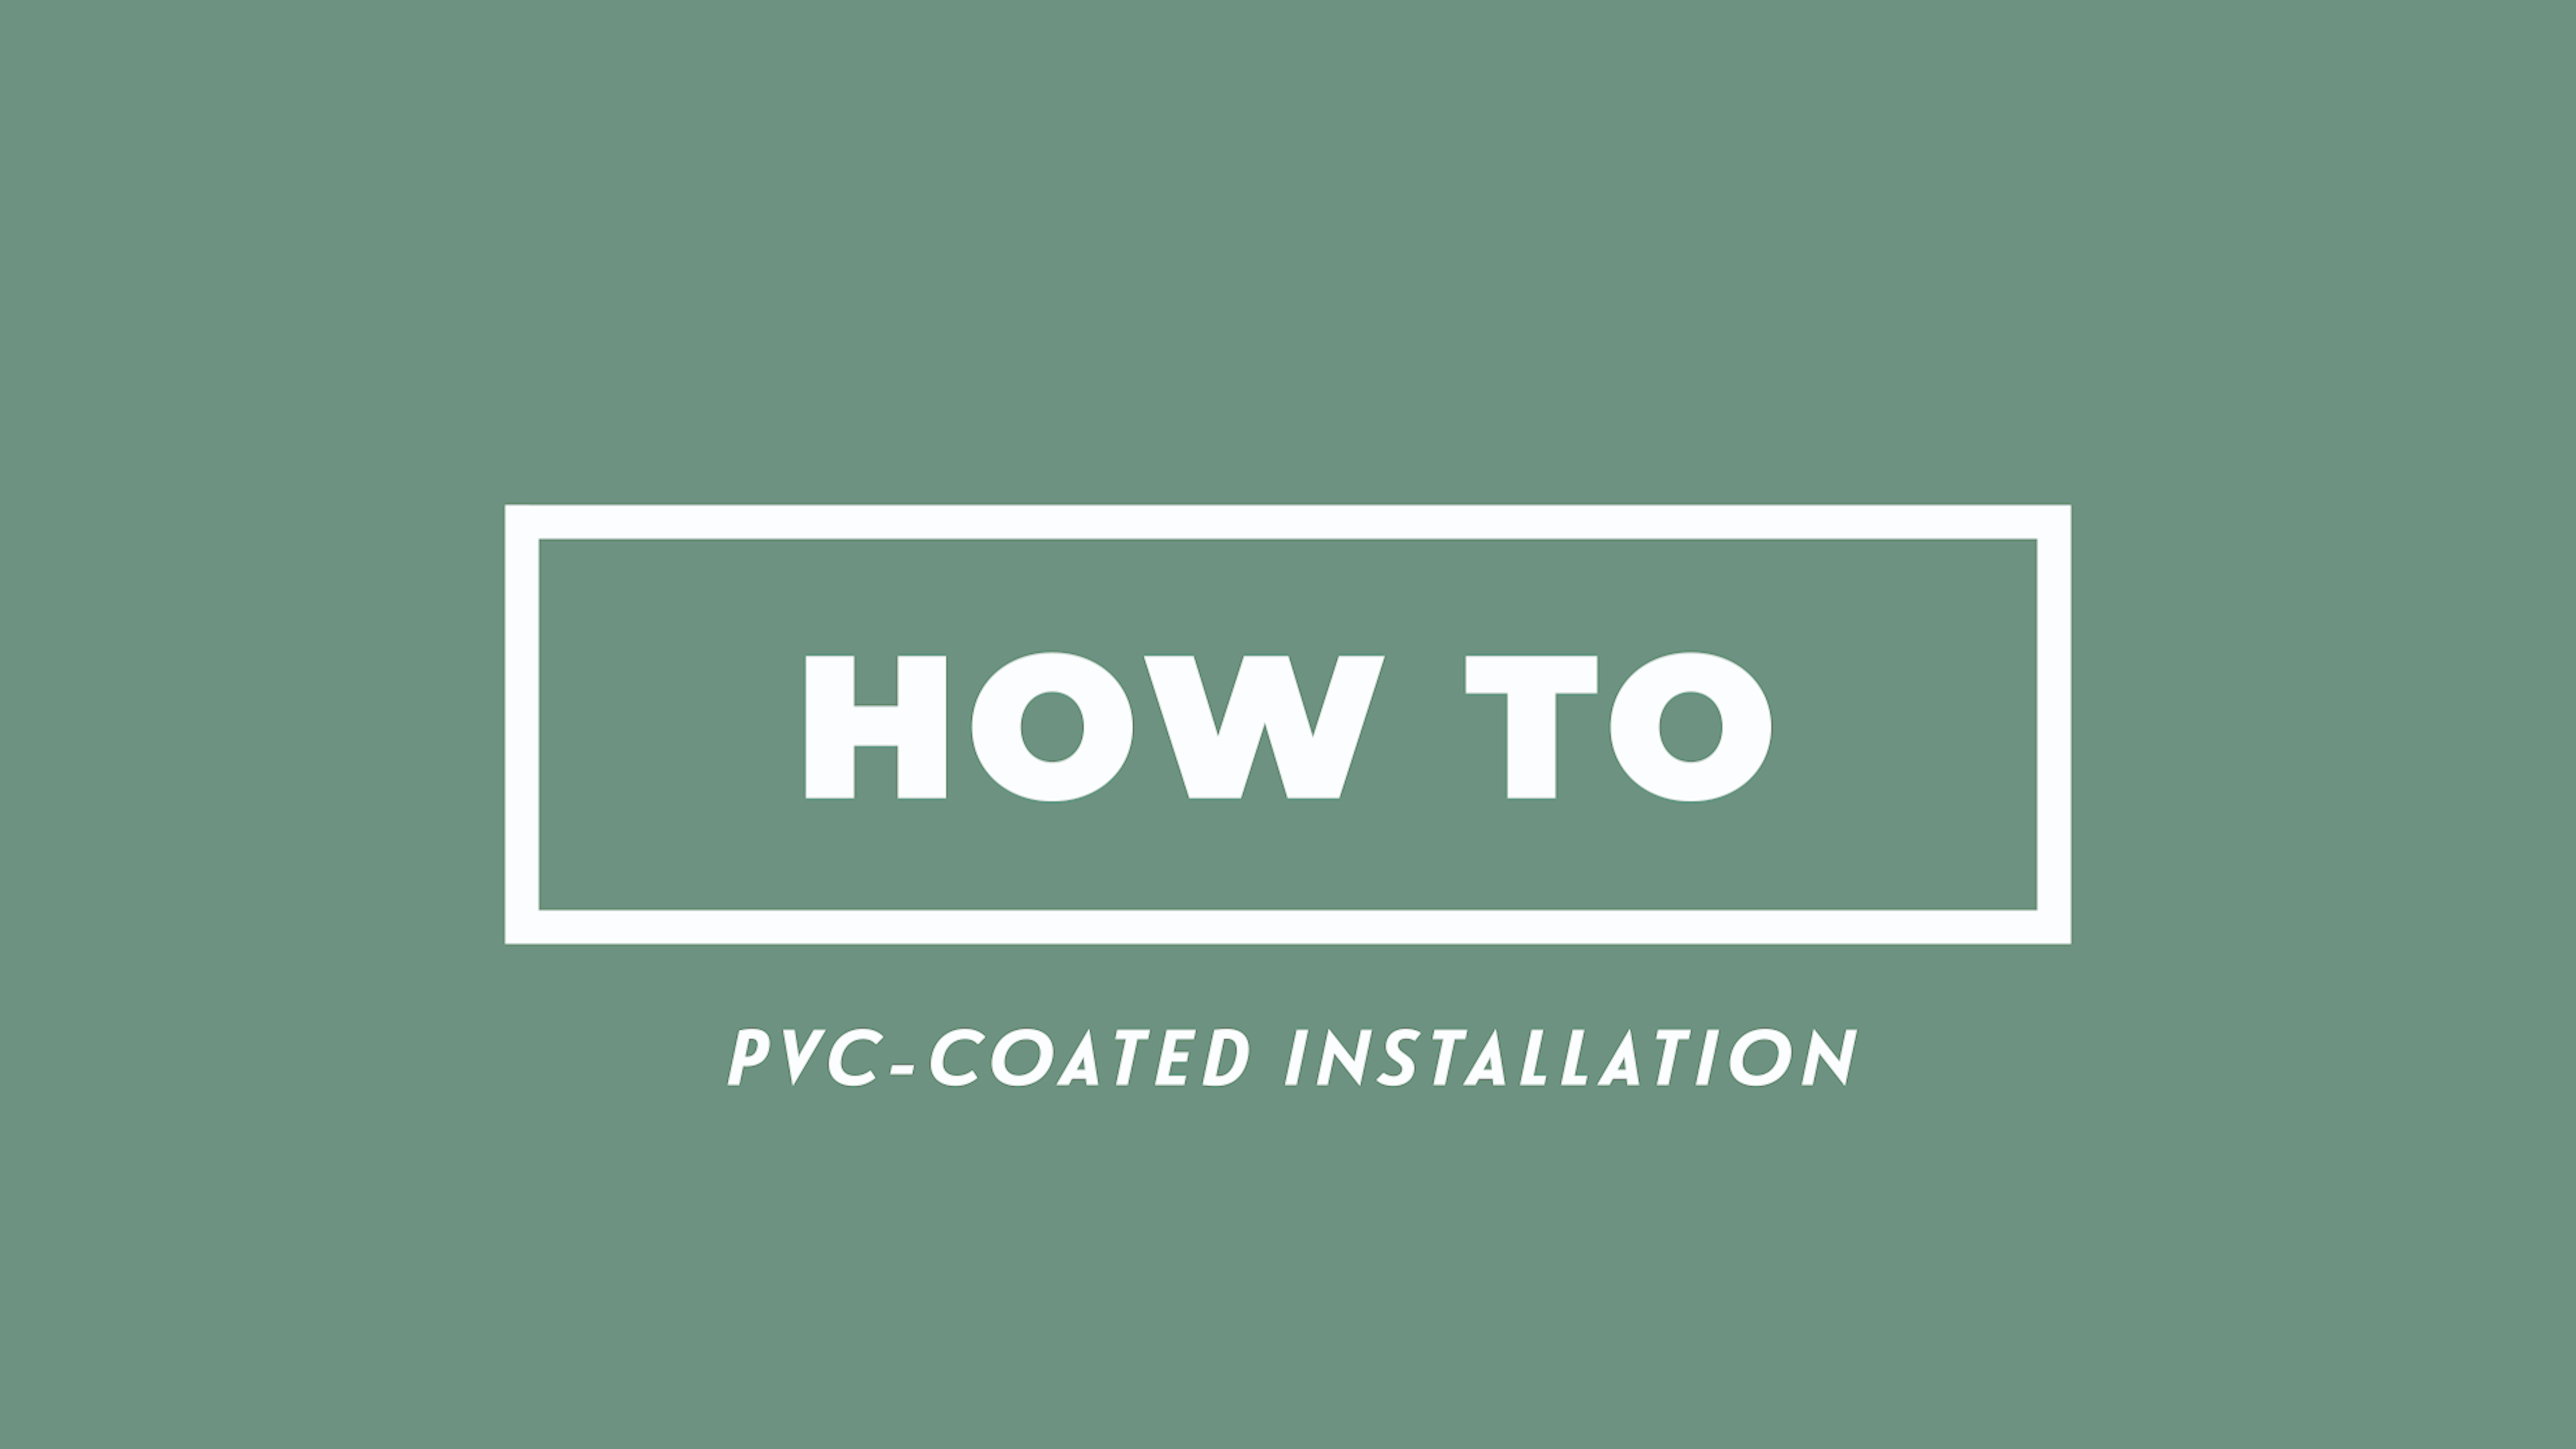 Perma-Cote PVC-Coated Installation Video